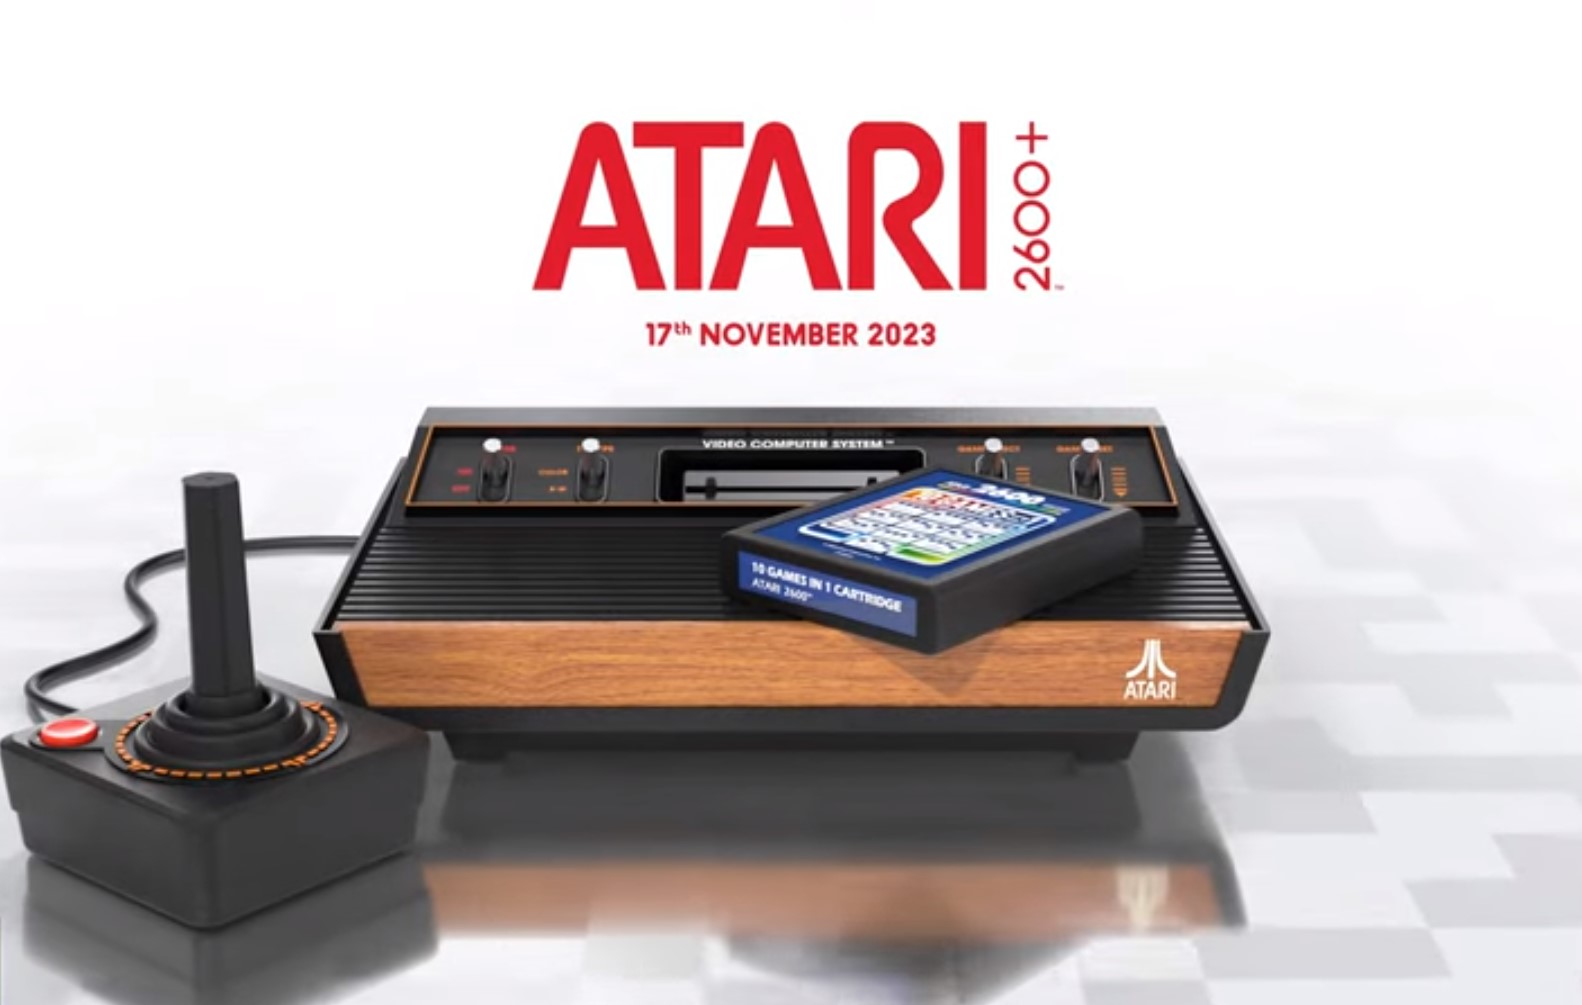 Atari 2600+ Is A Resurrection Of The Classic Console, Launches With Backward Compatibility